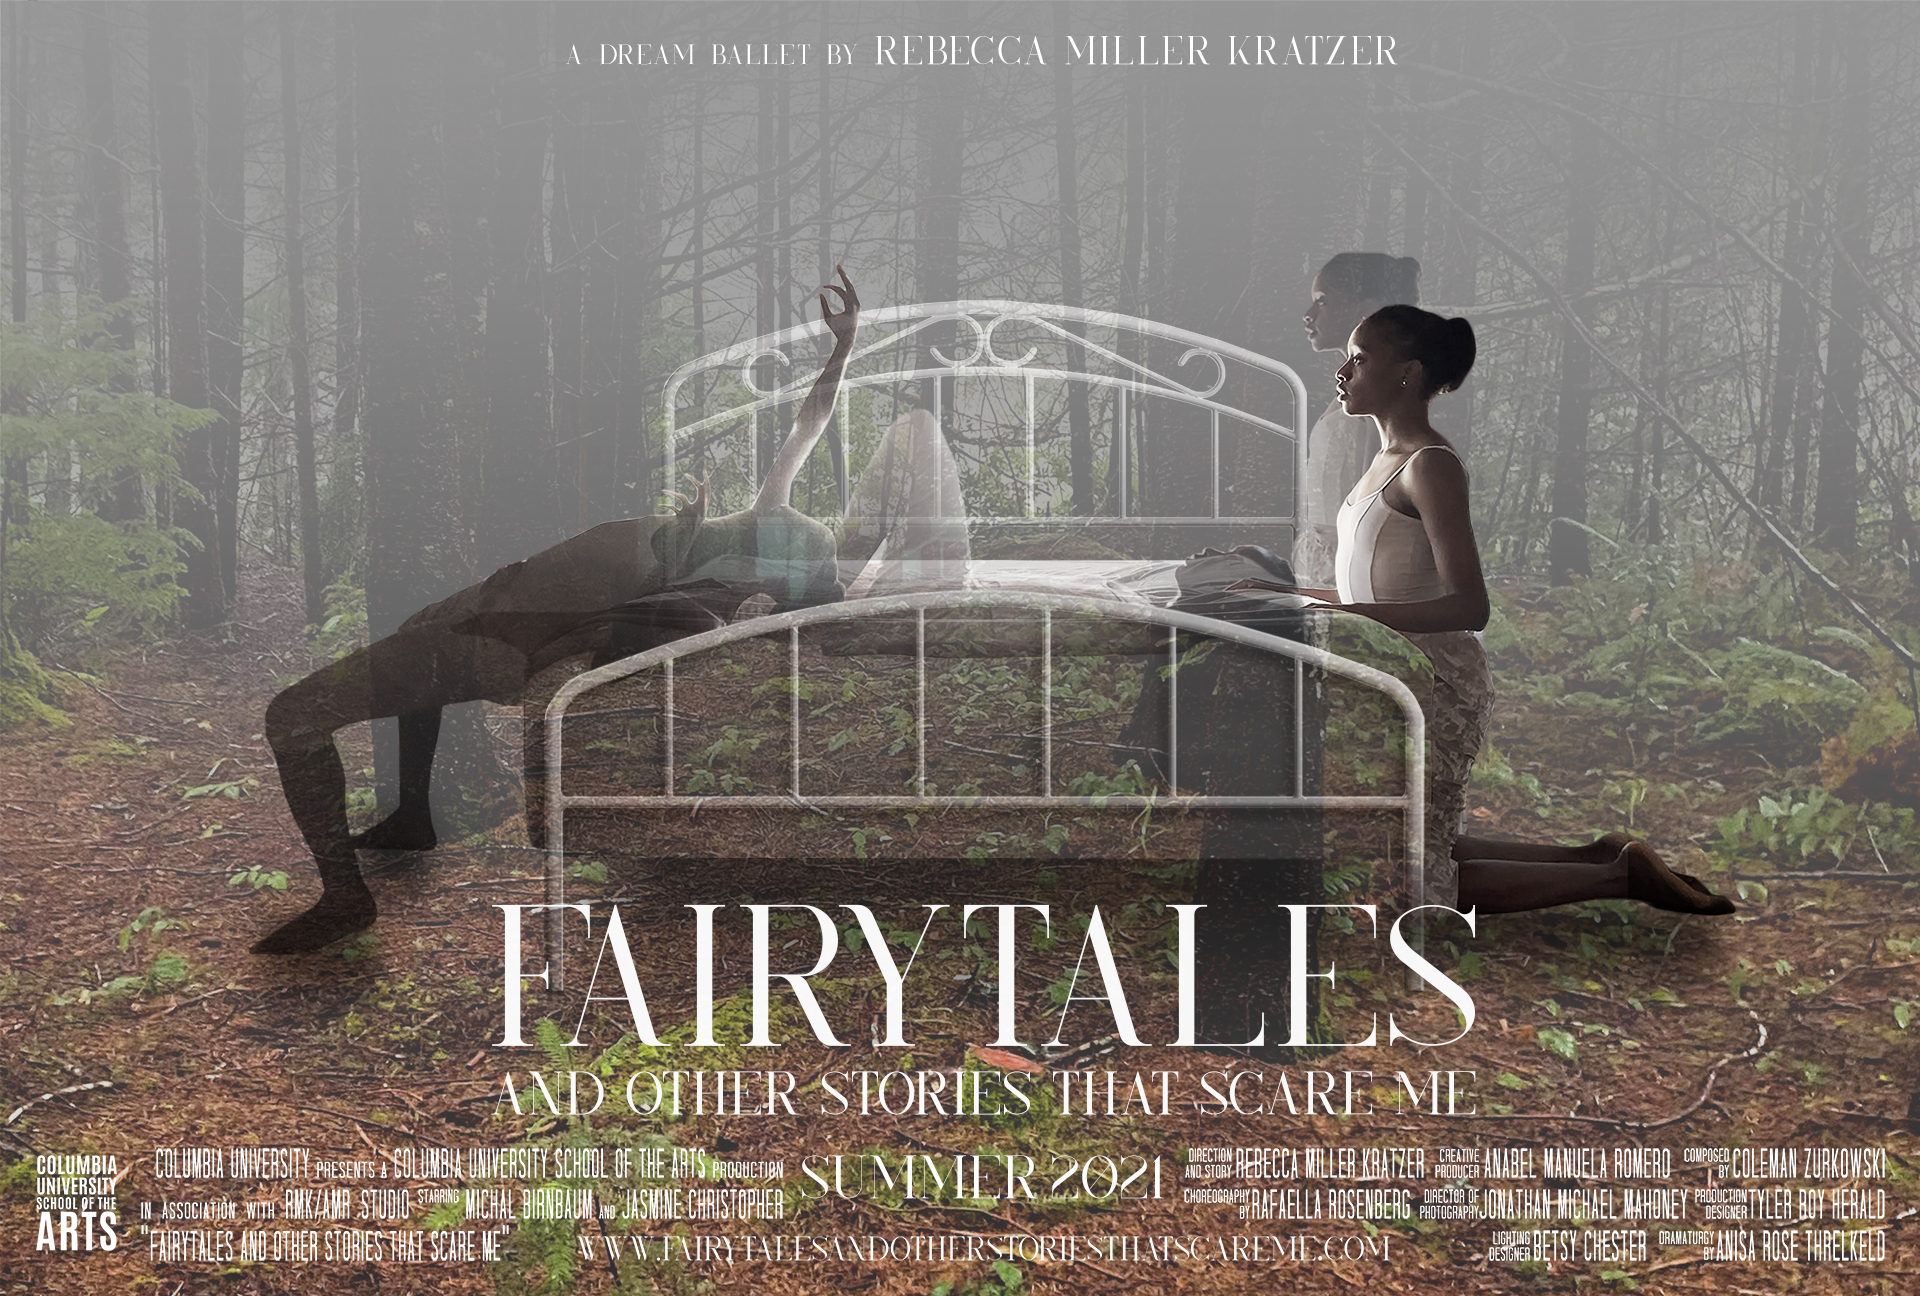 FAIRYTALES AND OTHER STORIES THAT SCARE ME to be Presented at Columbia University 